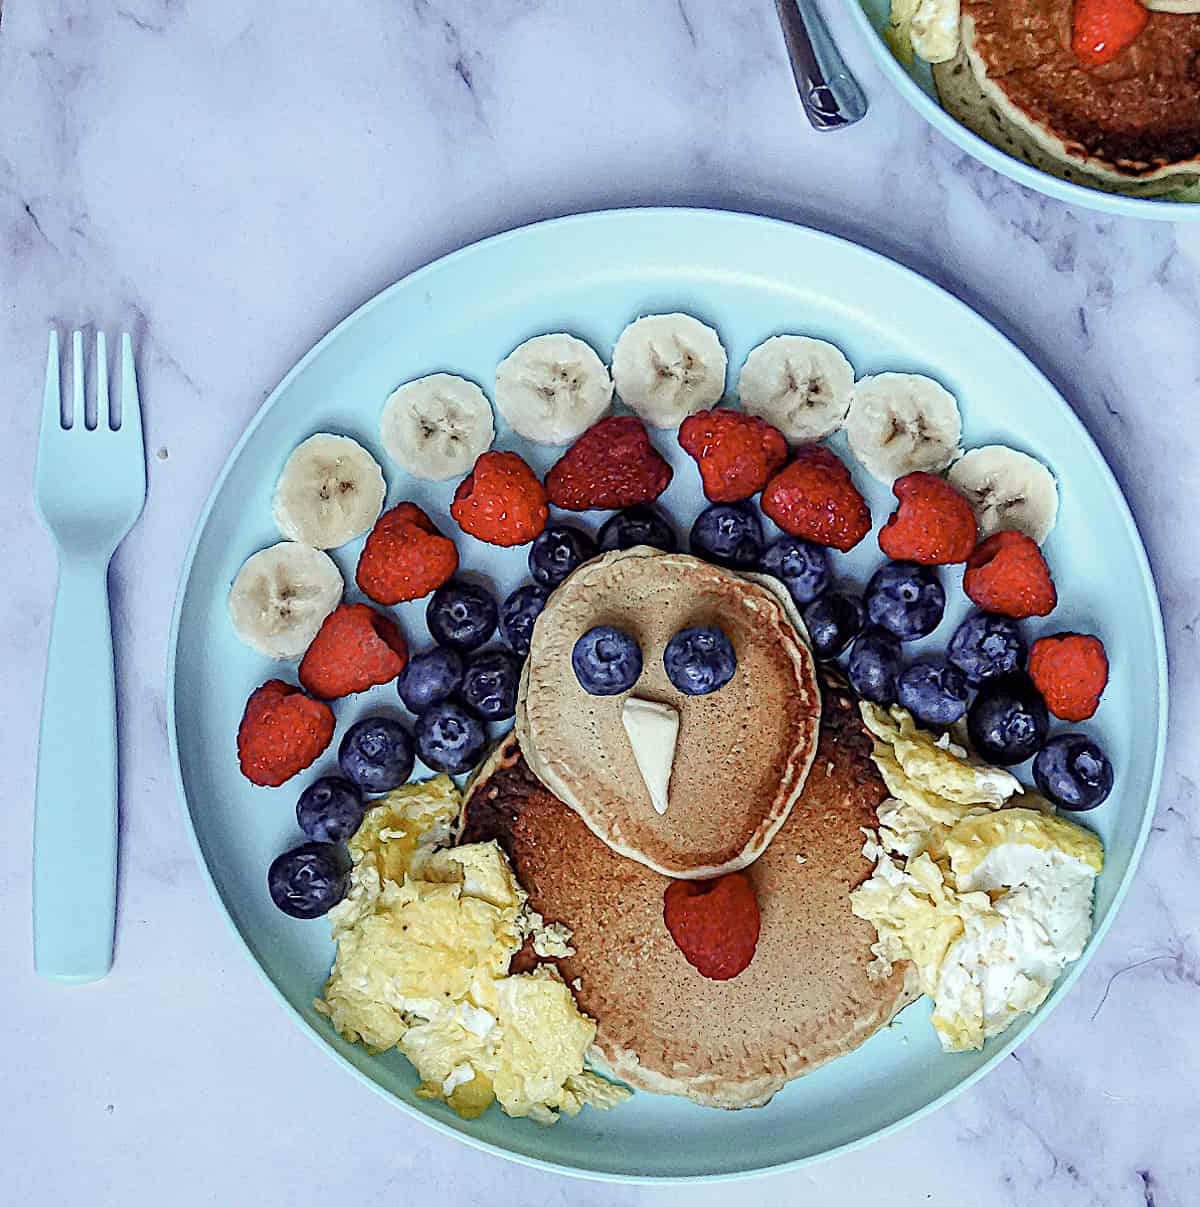 turkey shaped pancakes with fruit feathers and scrambled egg wings